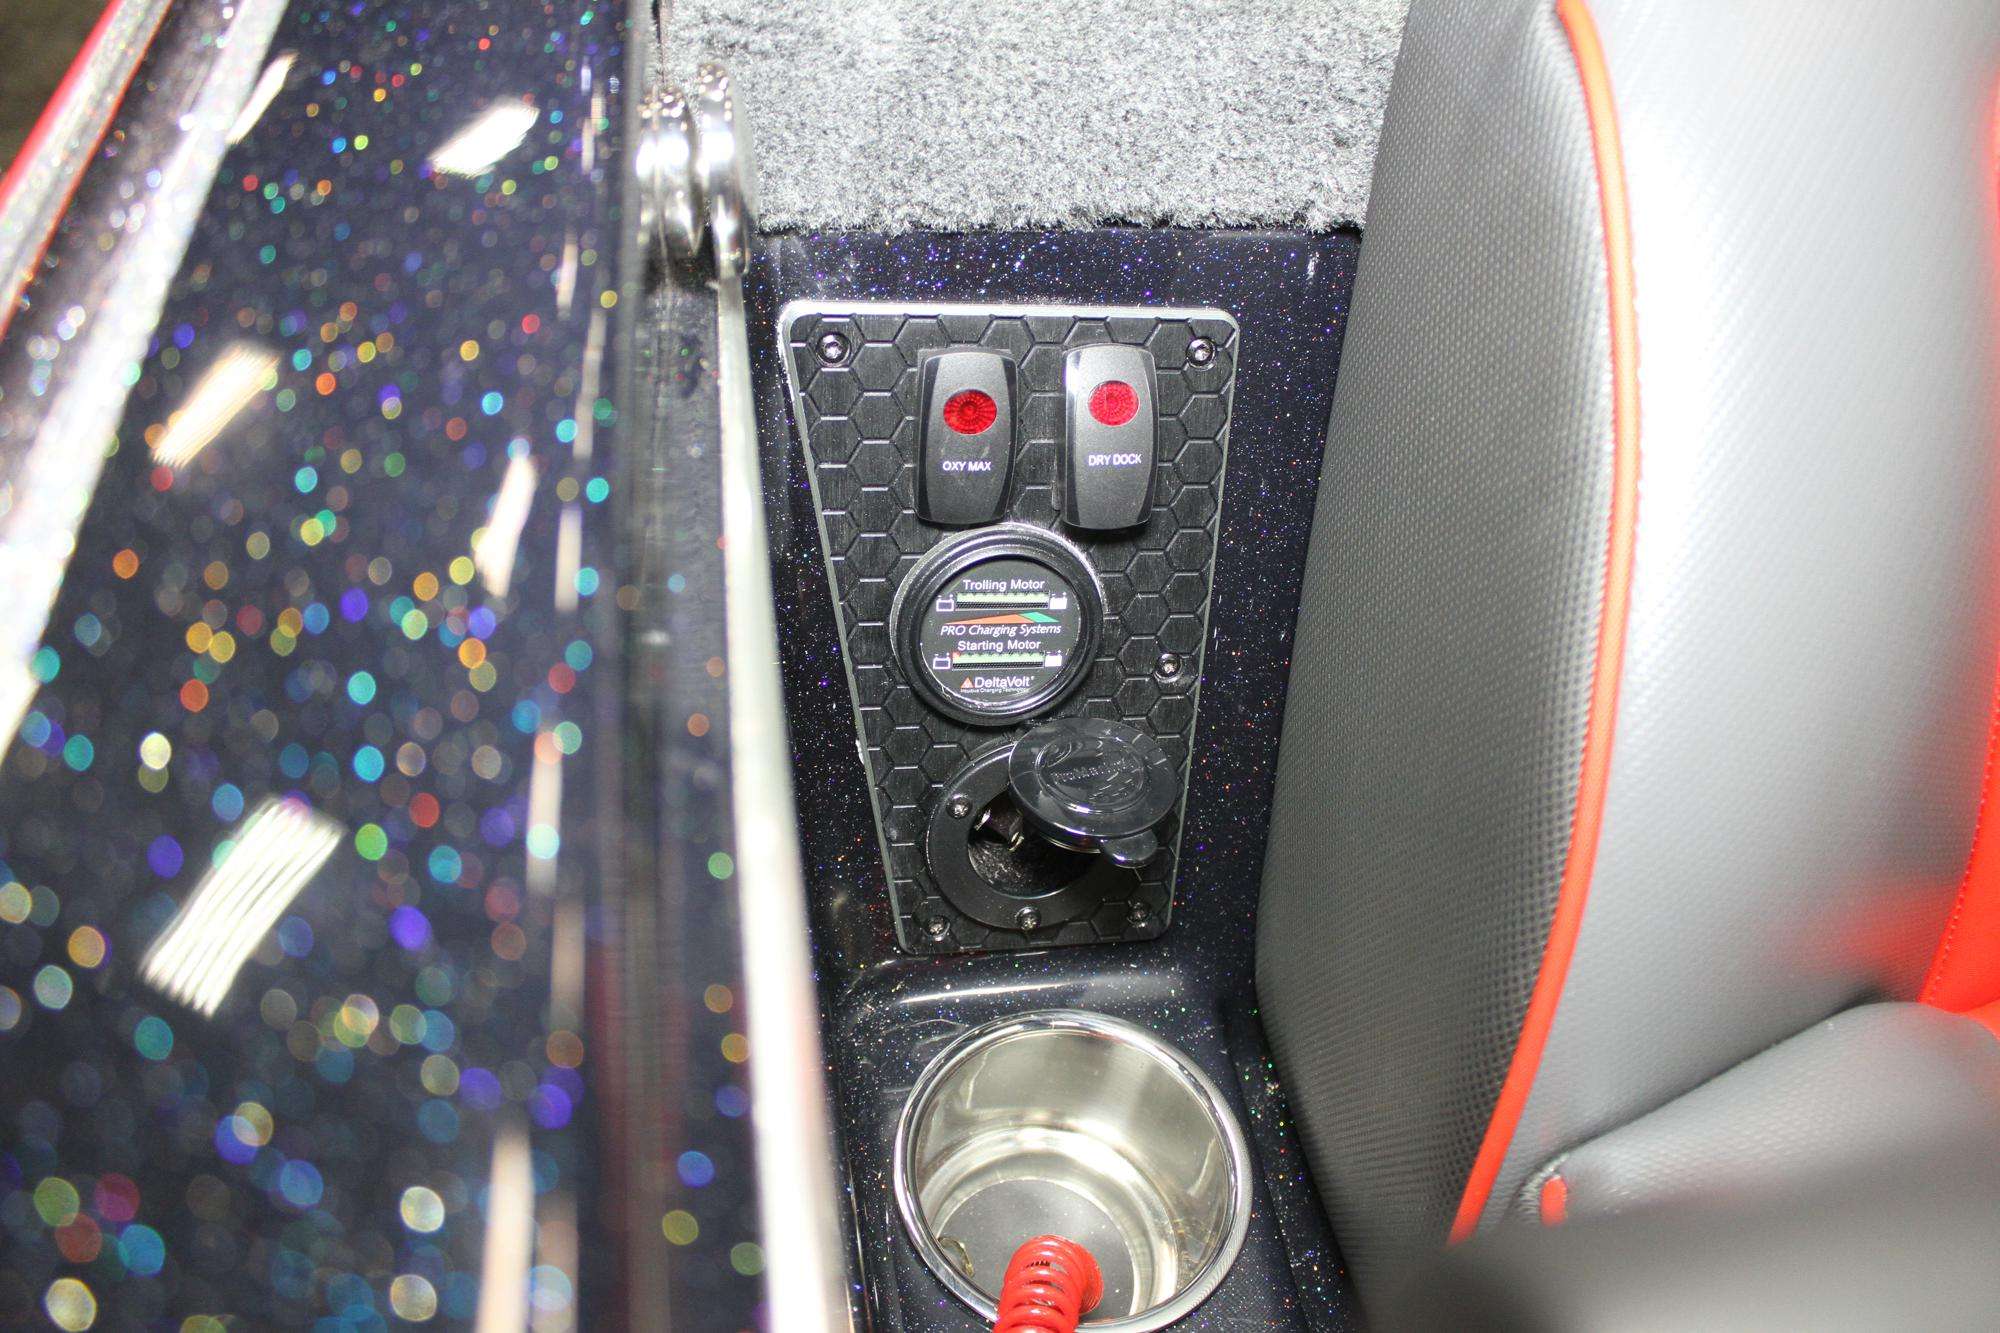 A new panel next to the driverâs seat which features switches for the Oxygenators, Dry Dock System, a battery monitor and charging plug.